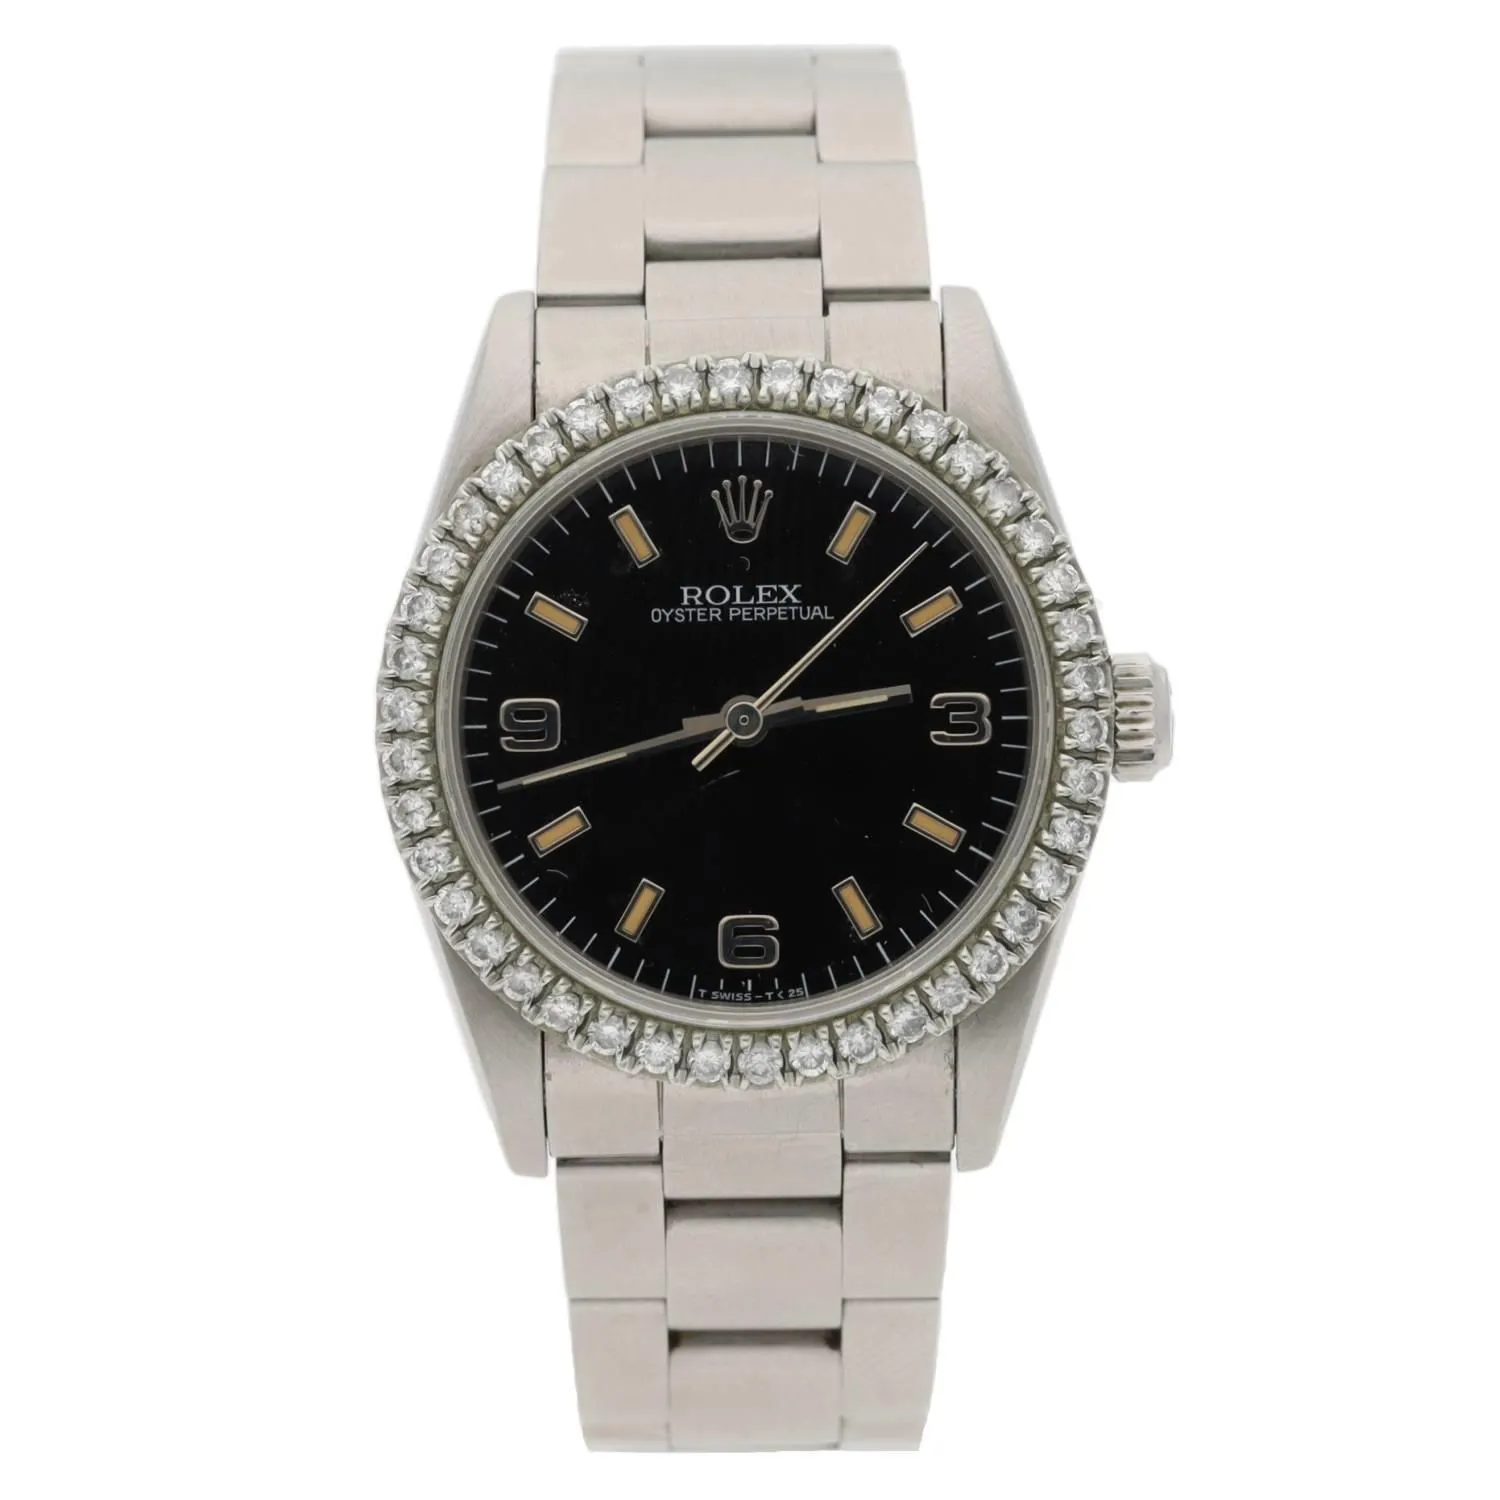 Rolex Oyster Perpetual 67480 31mm Stainless steel and diamond-set Black